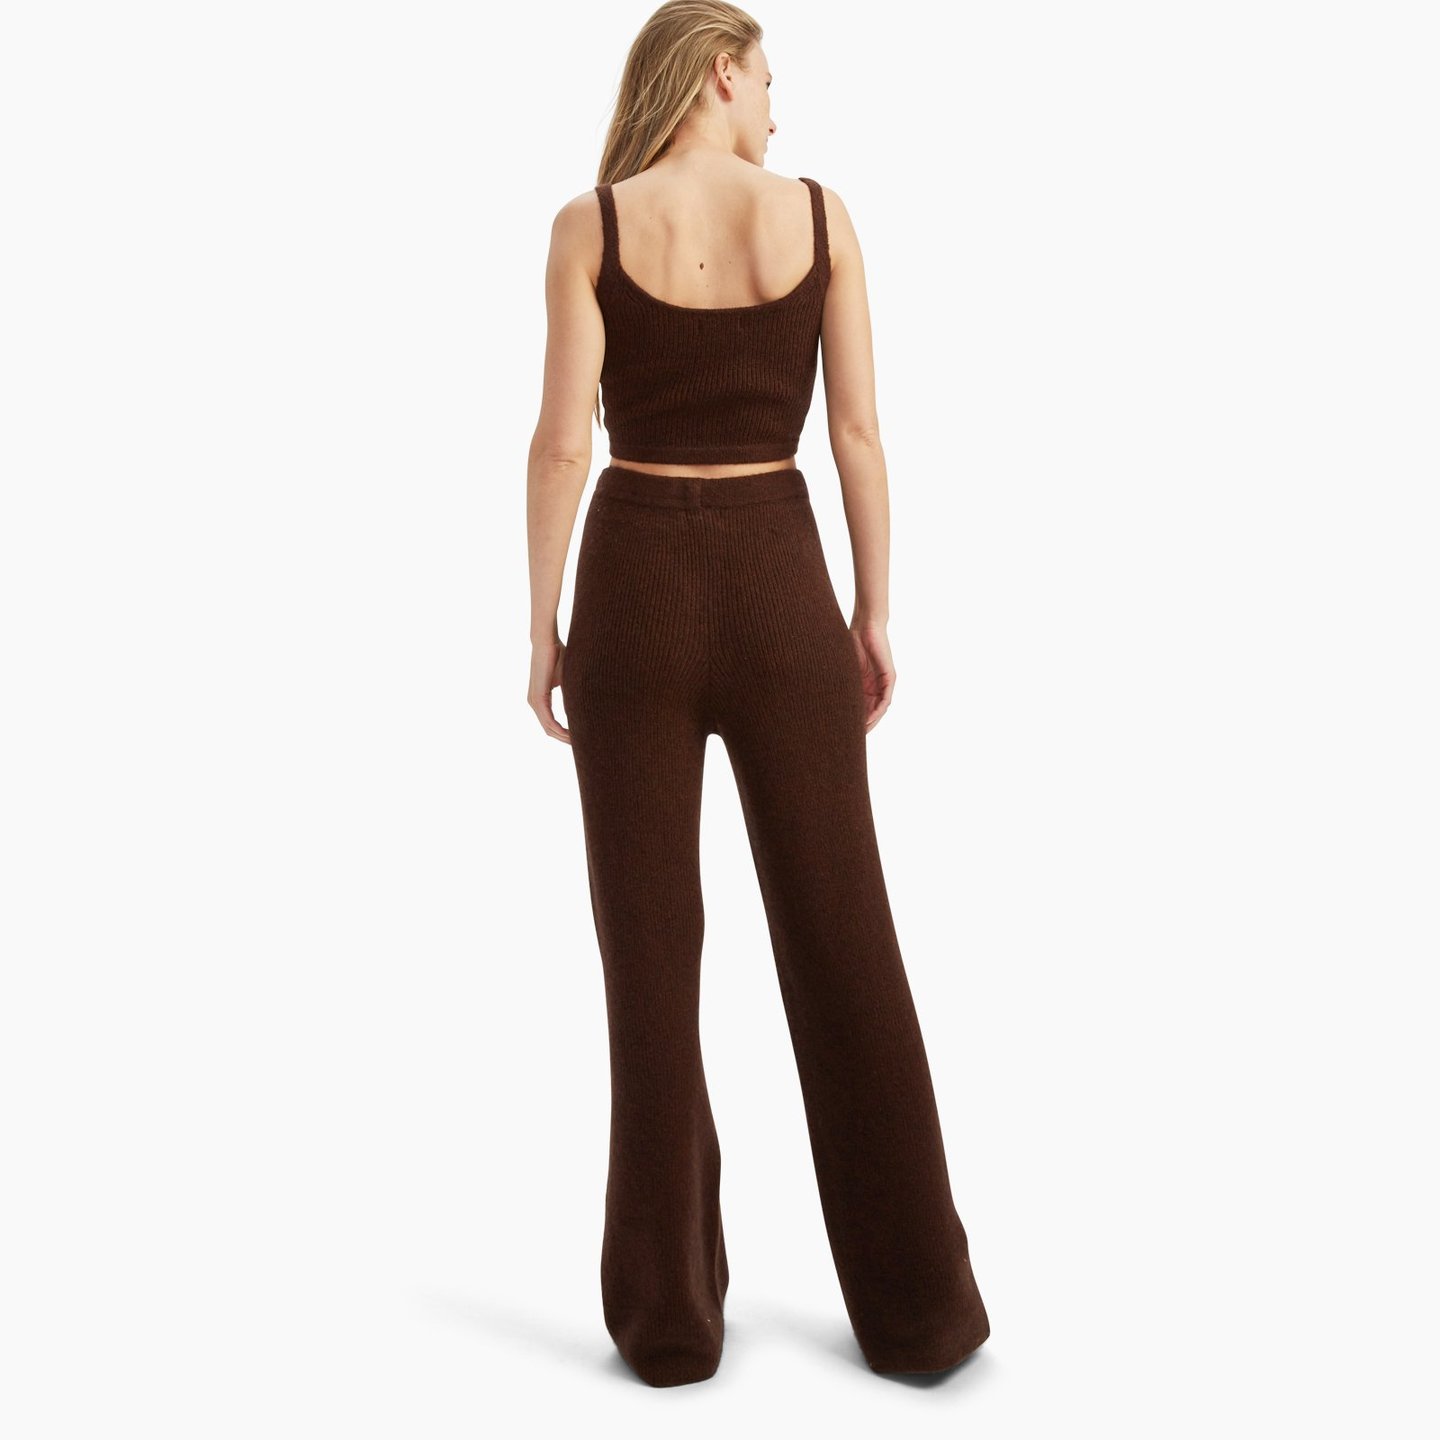 NWEP001444_Luxe_Merino_Cashmere_Wide_Leg_Pant_Cacao_014_1440x.jpg